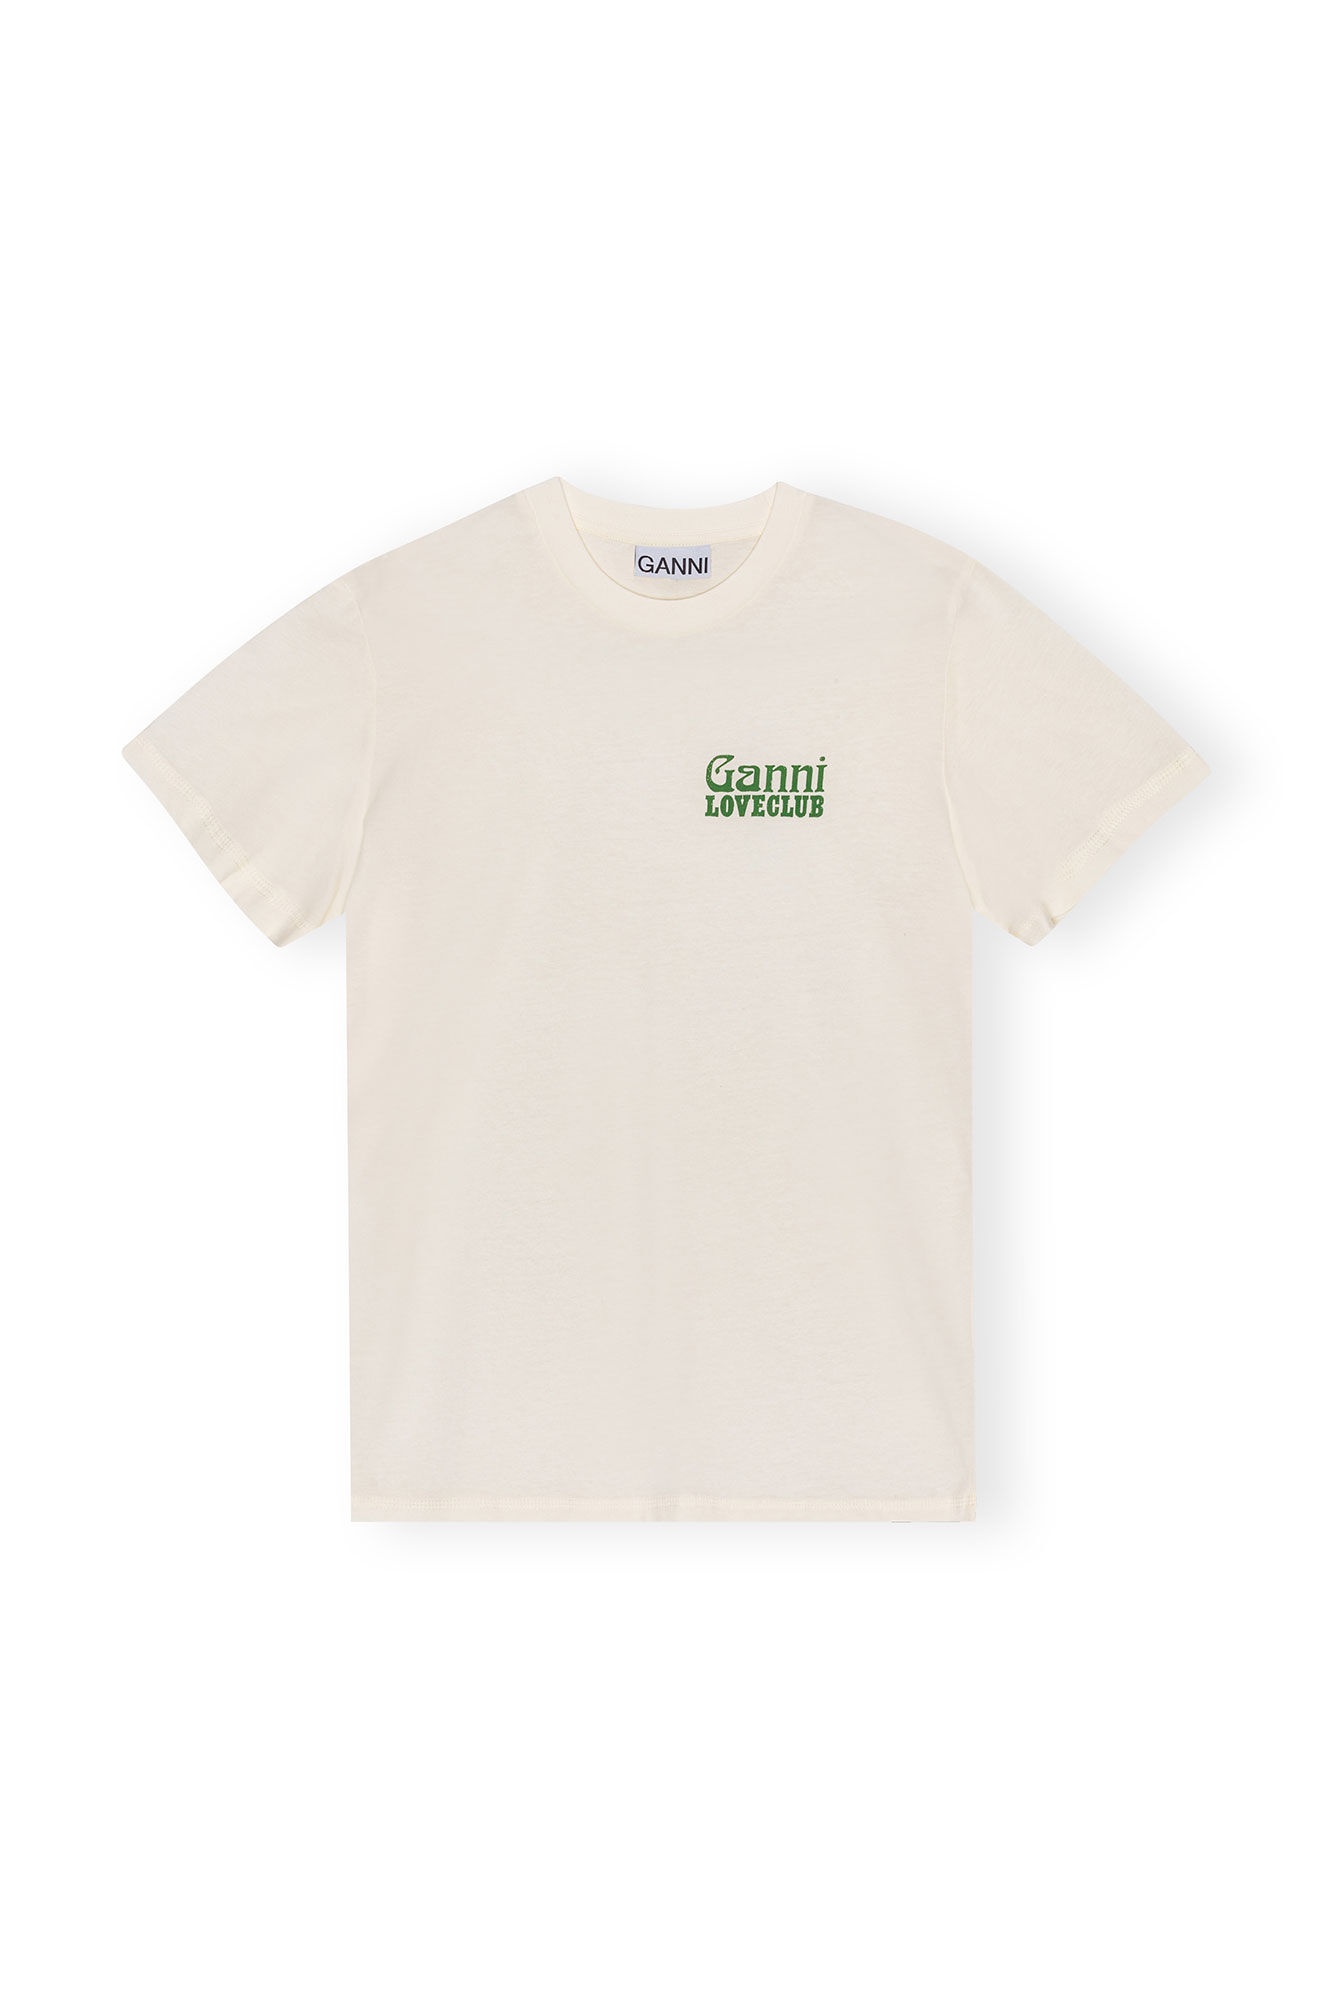 WHITE RELAXED LOVECLUB T-SHIRT - 3